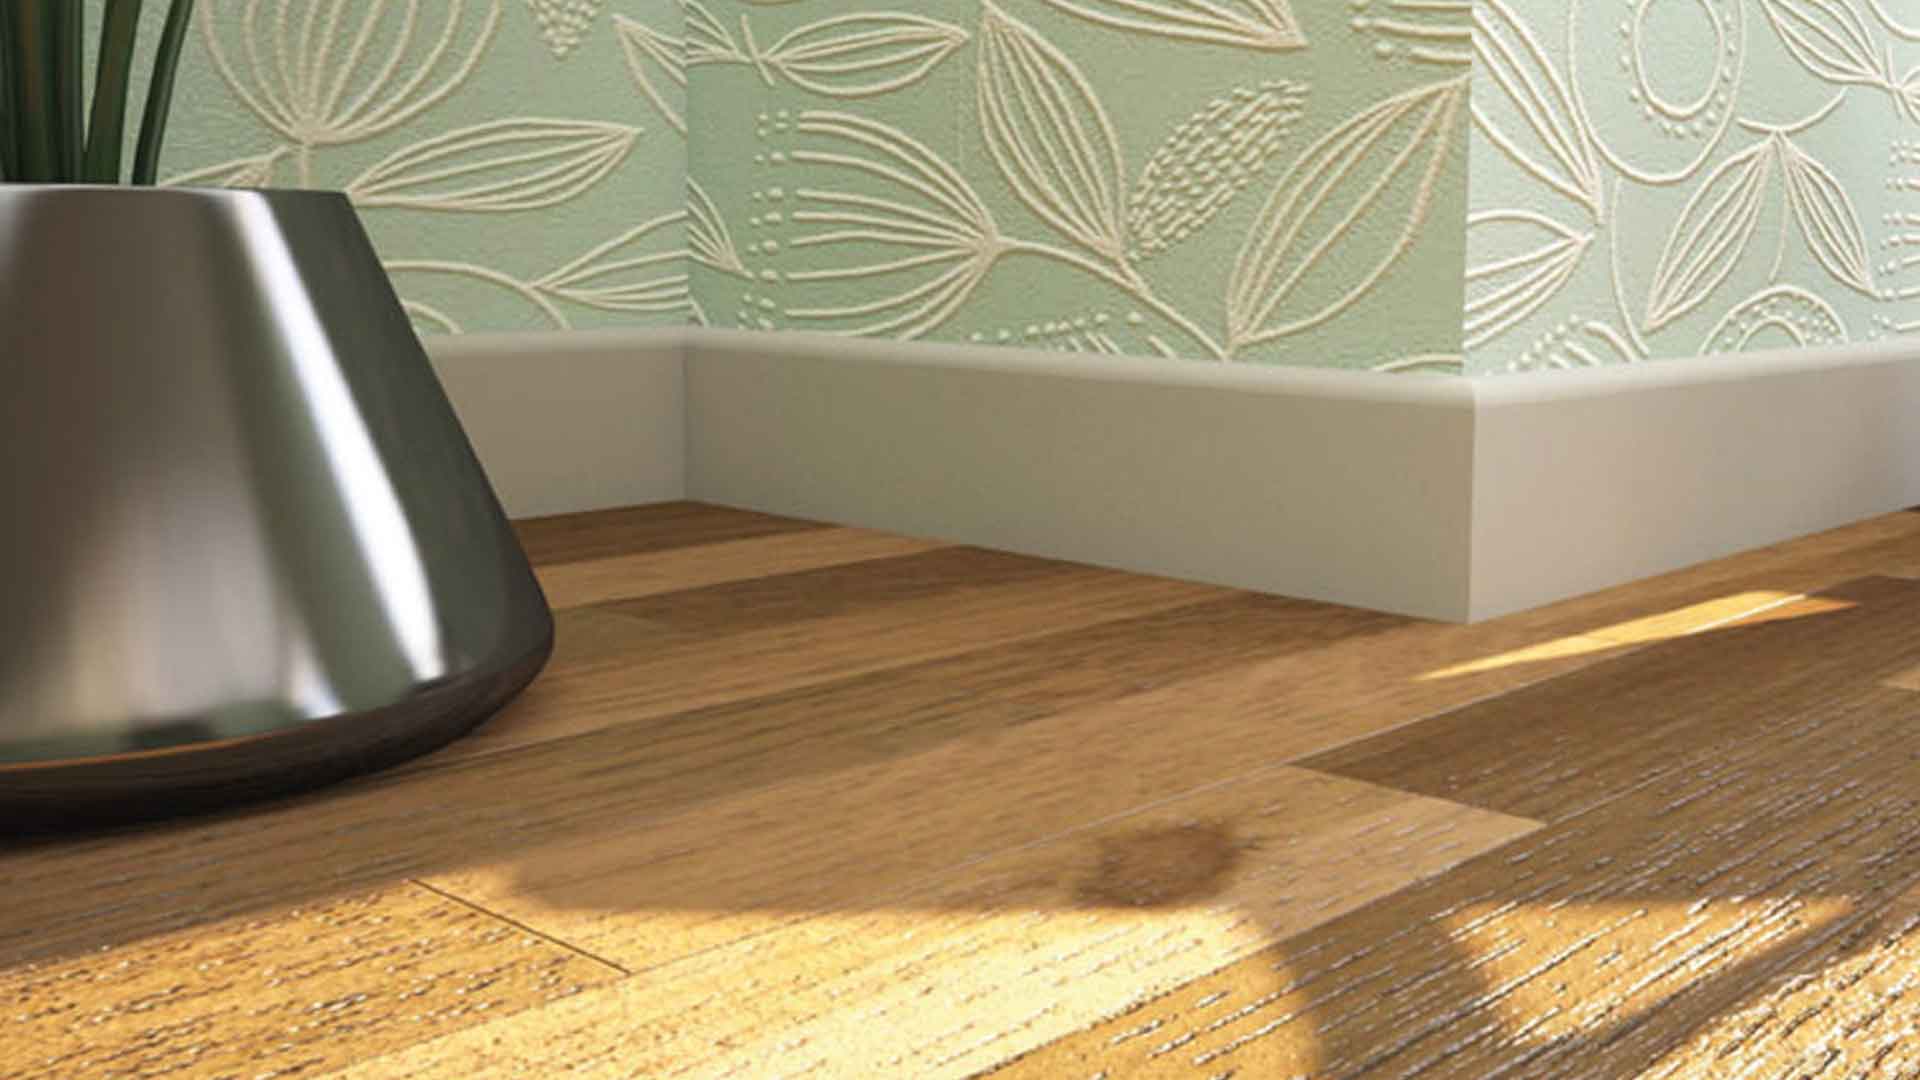 How do we choose design skirting boards for our home and office?